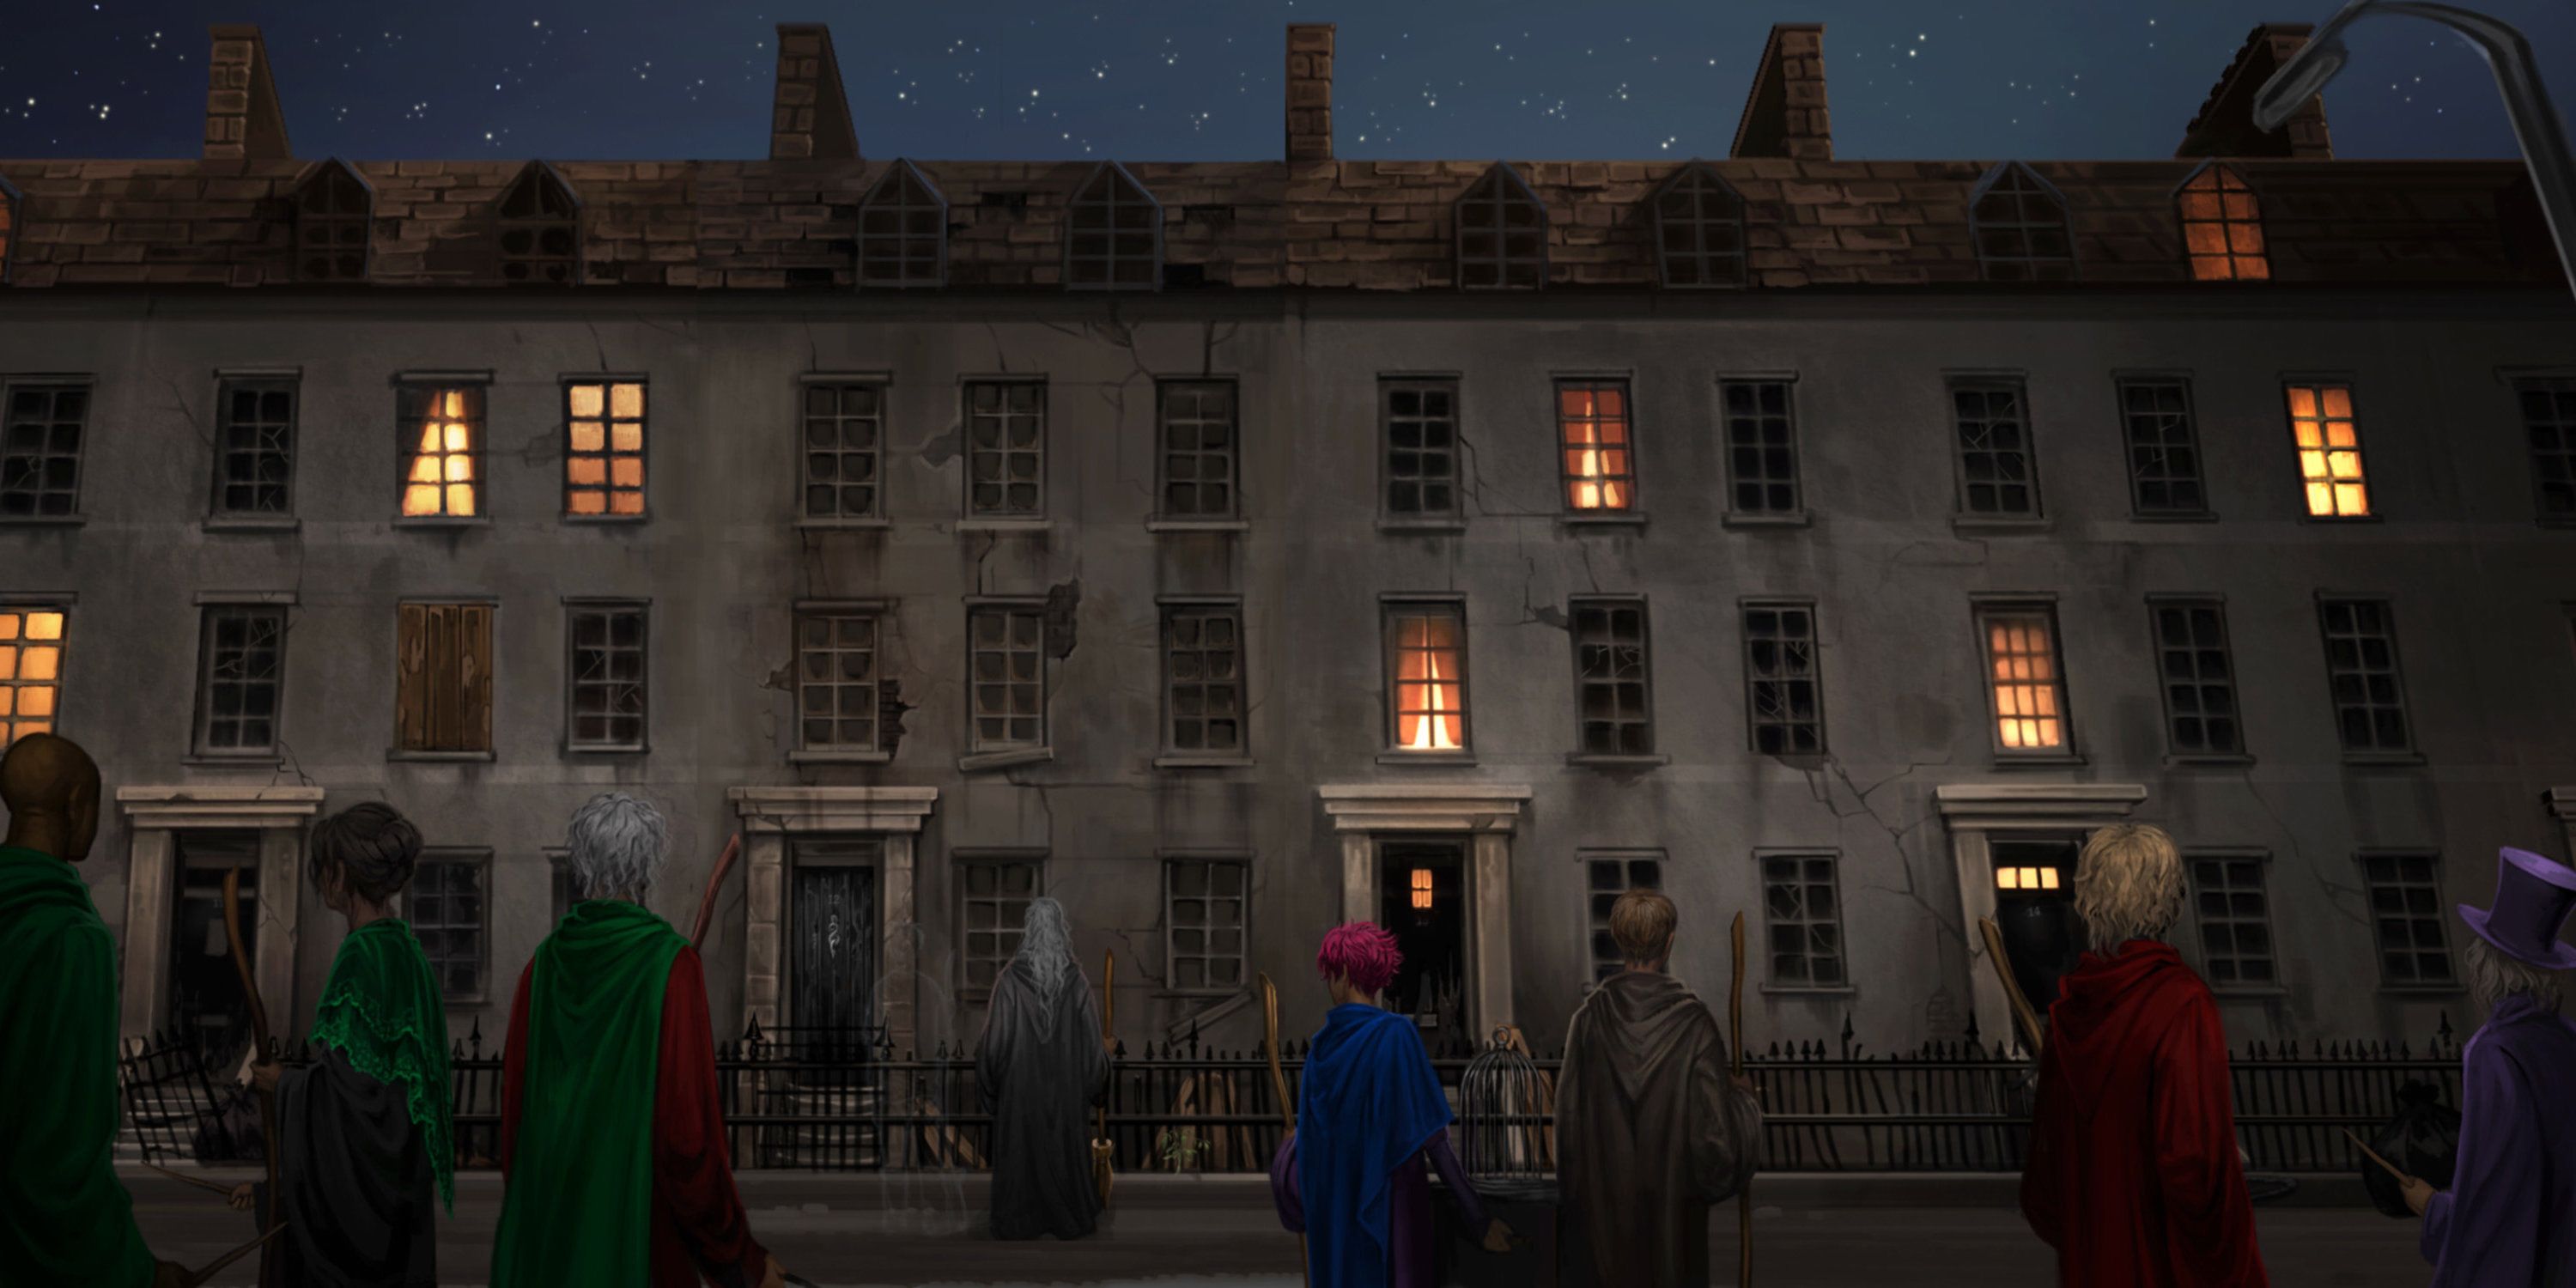 10 Facts About 12 Grimmauld Place The Harry Potter Movies Leave Out